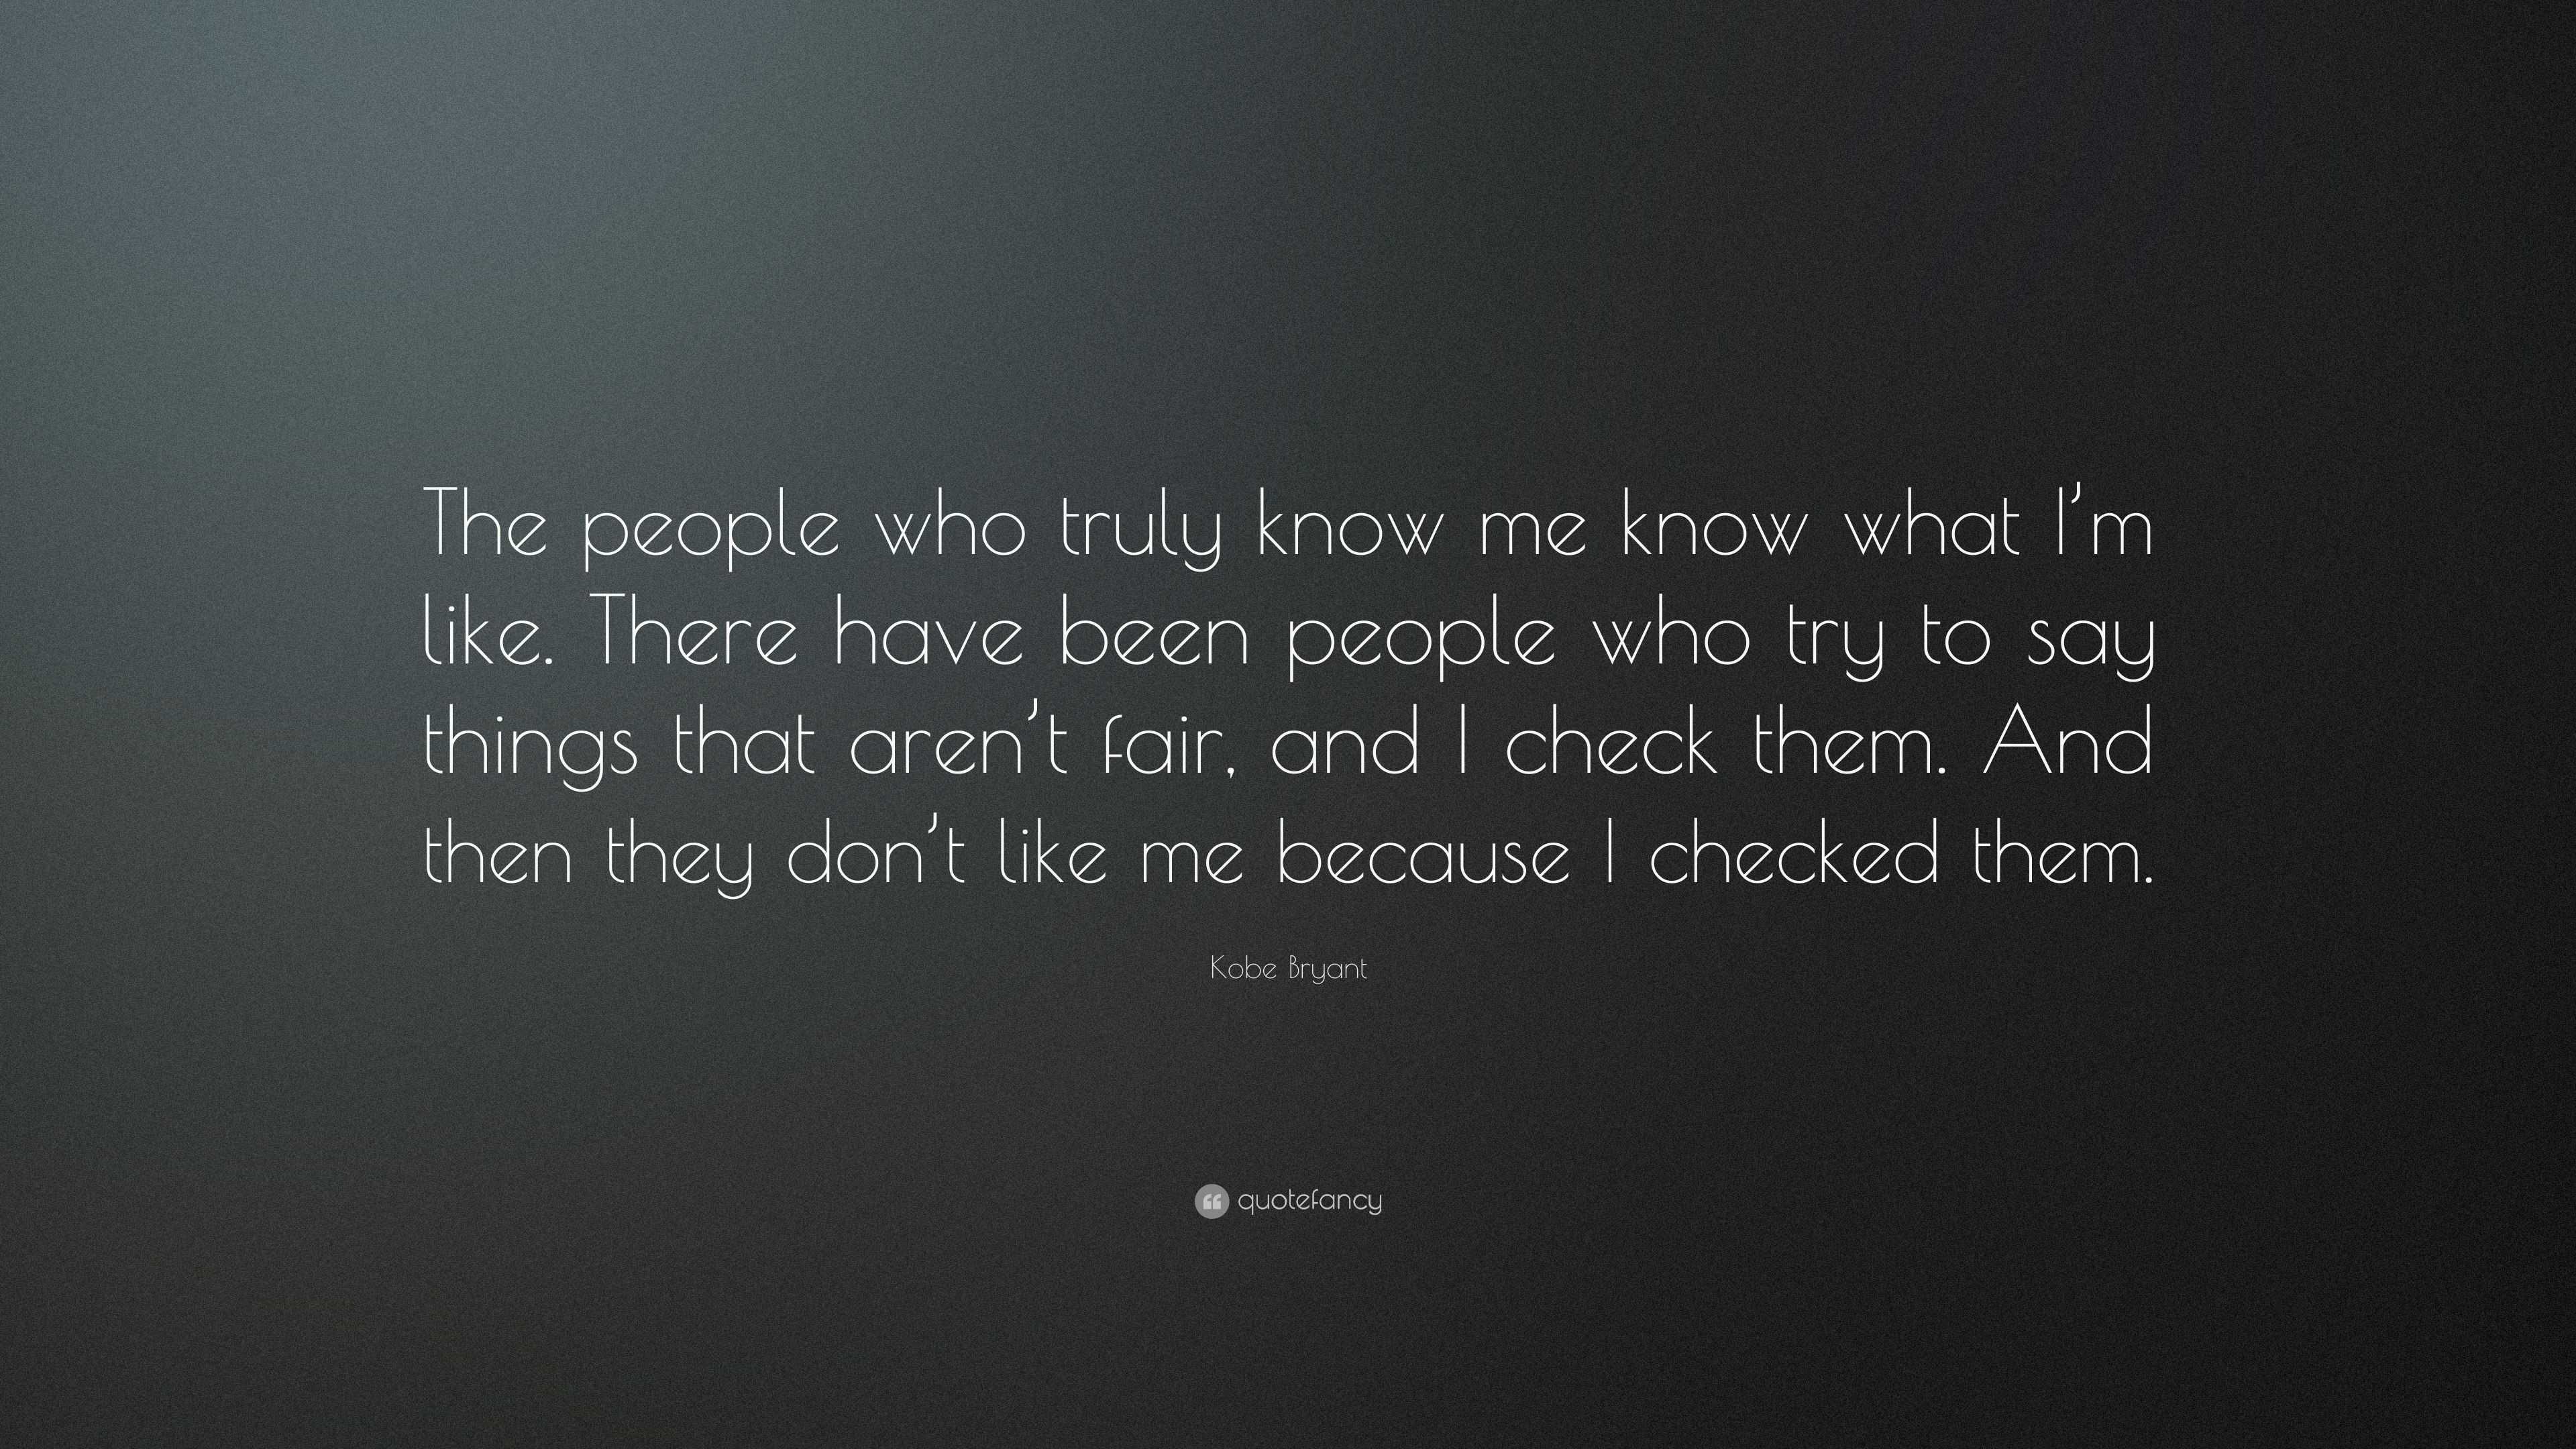 Kobe Bryant Quote: “The people who truly know me know what I’m like ...